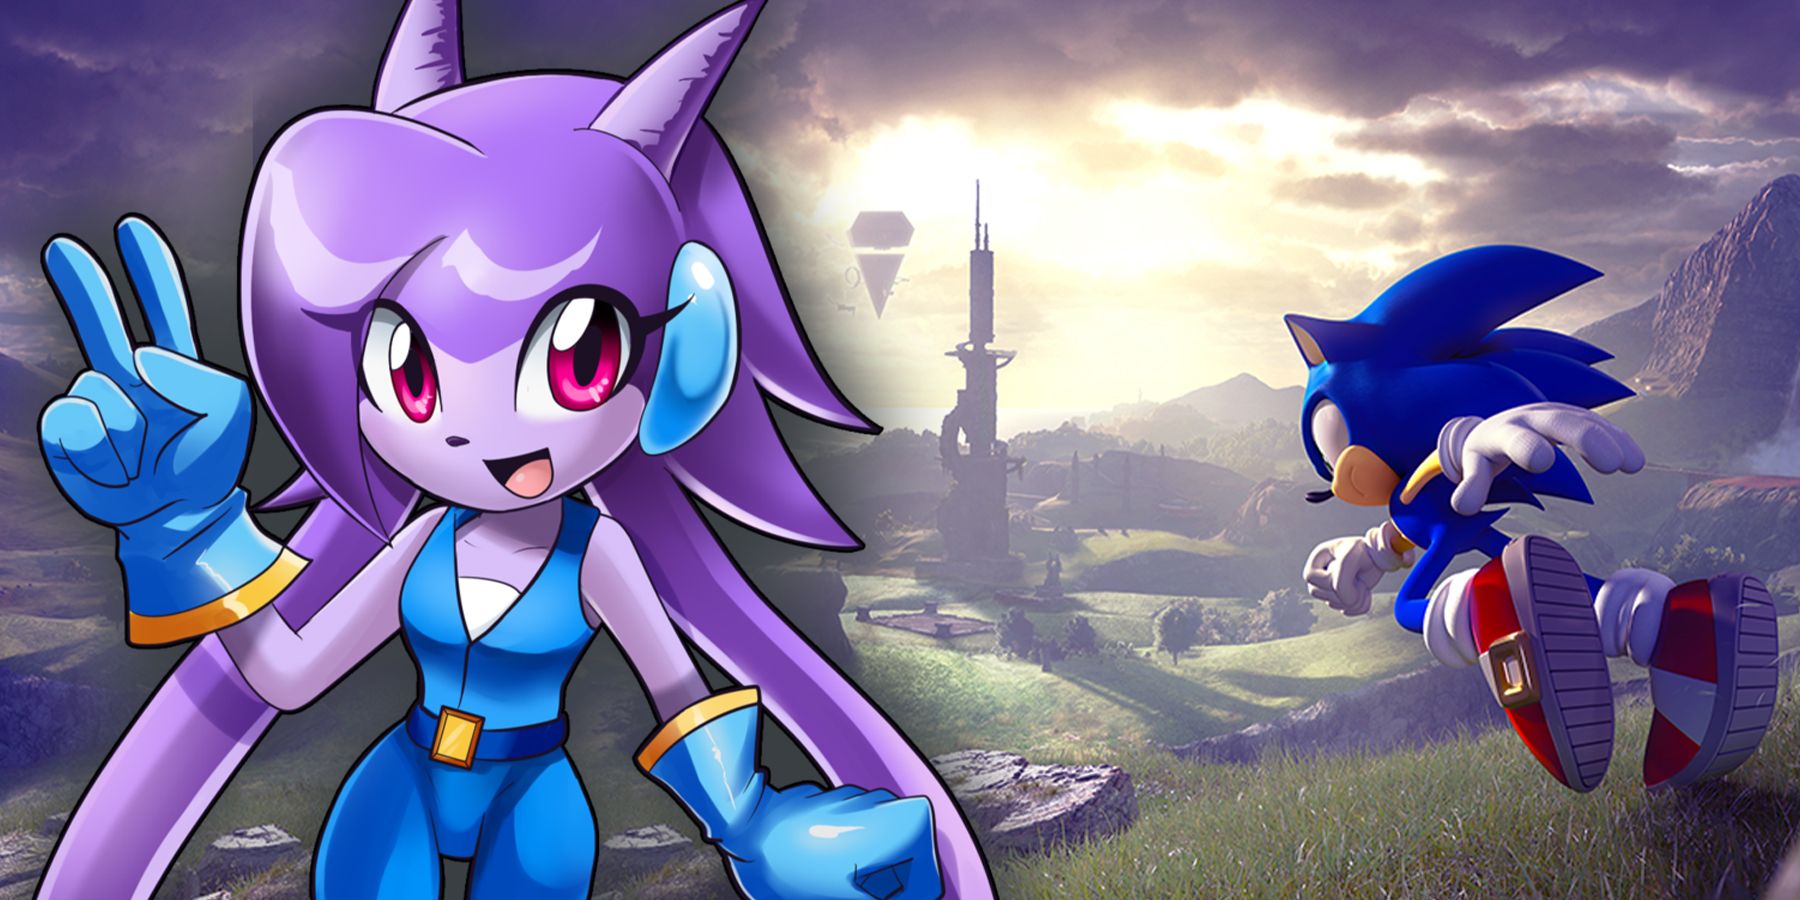 Lilac from Freedom Planet on a Sonic Frontiers poster